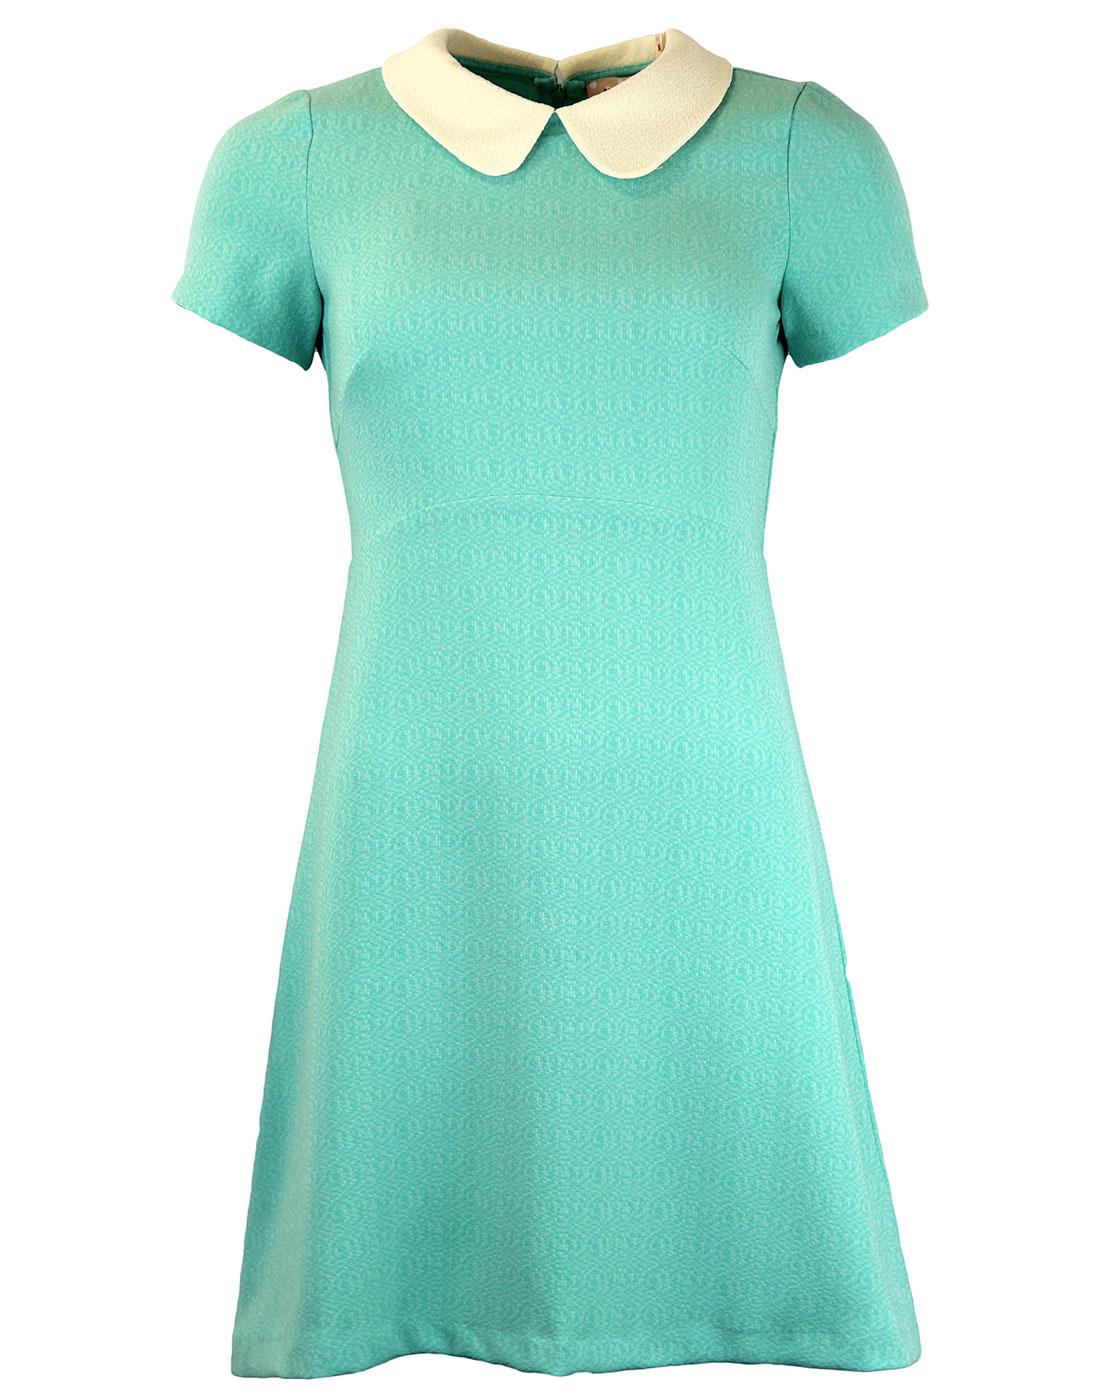 Perfect Penny TRAFFIC PEOPLE 60s Mod Texture Dress